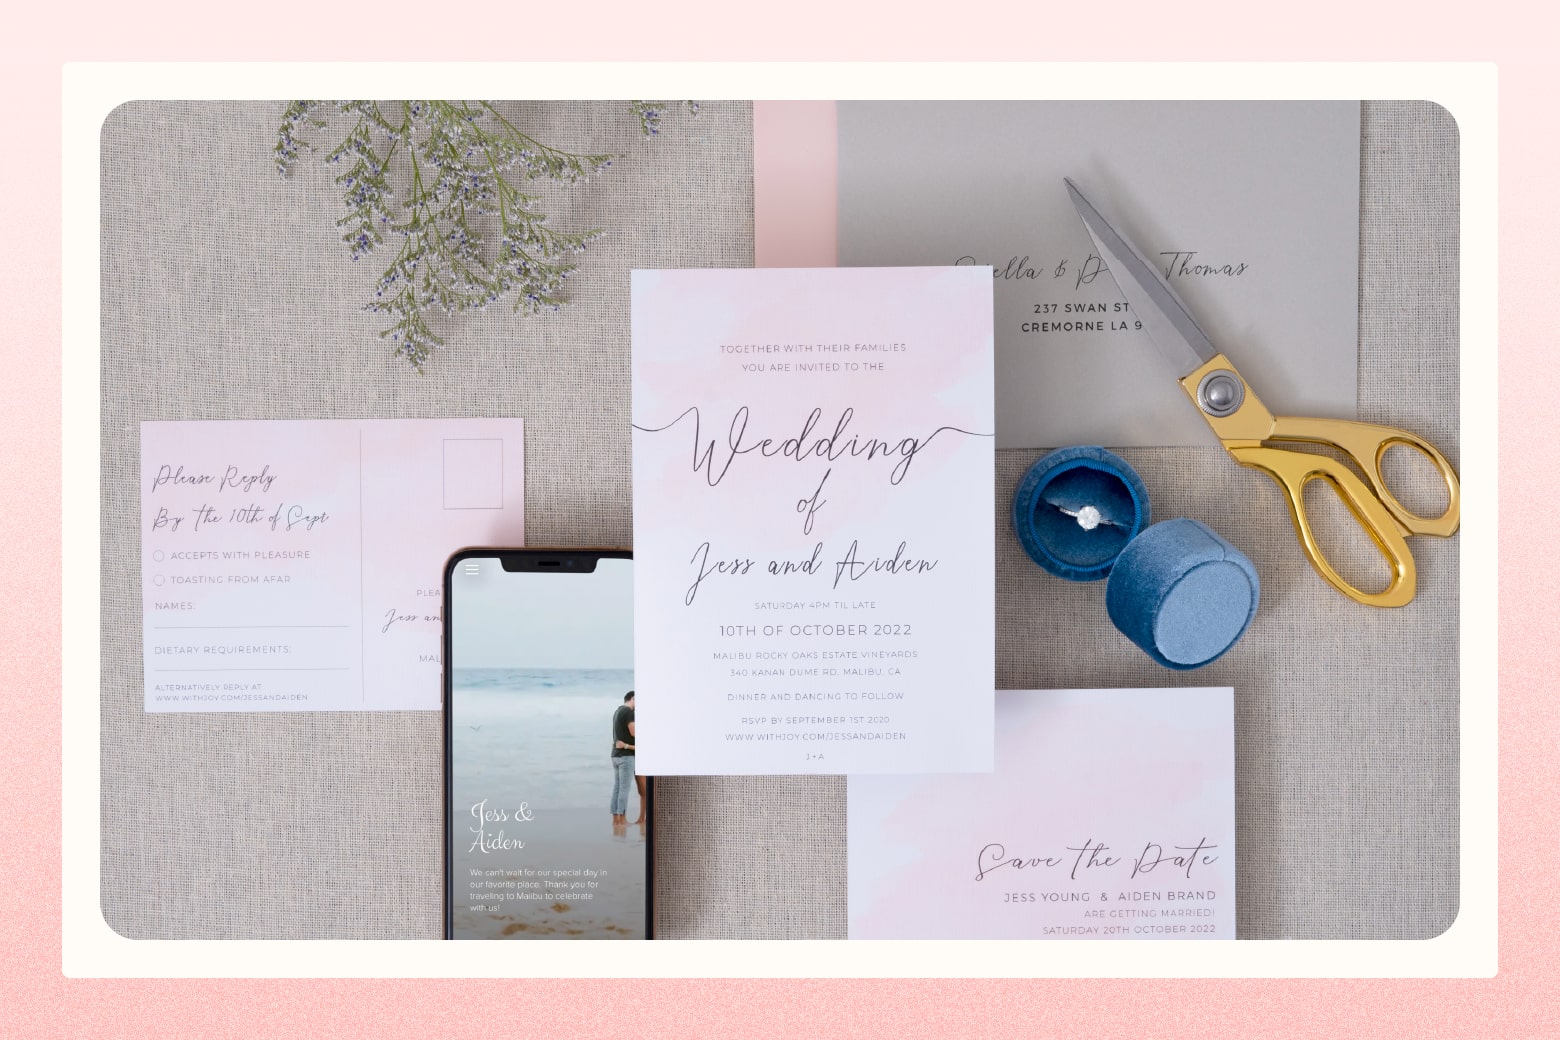 Wedding Invitation Accessories: Enhancing Your Special Day